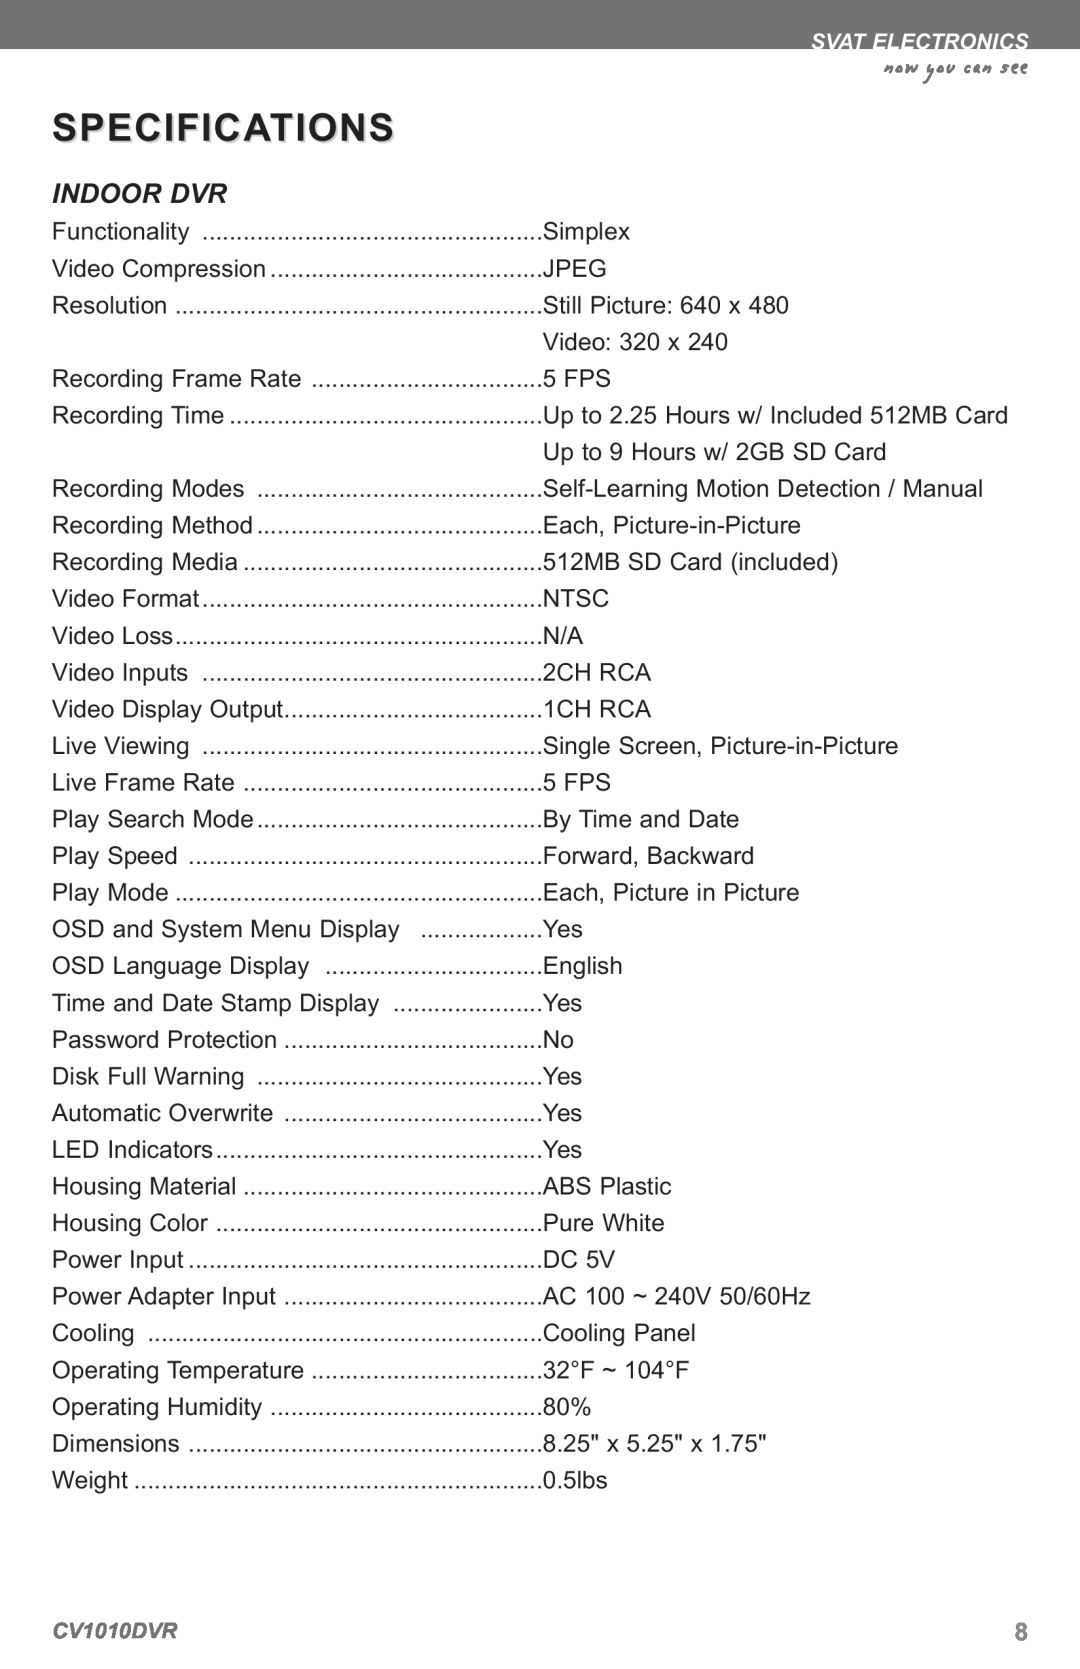 SVAT Electronics CV1010 instruction manual Specifications, now you can see 